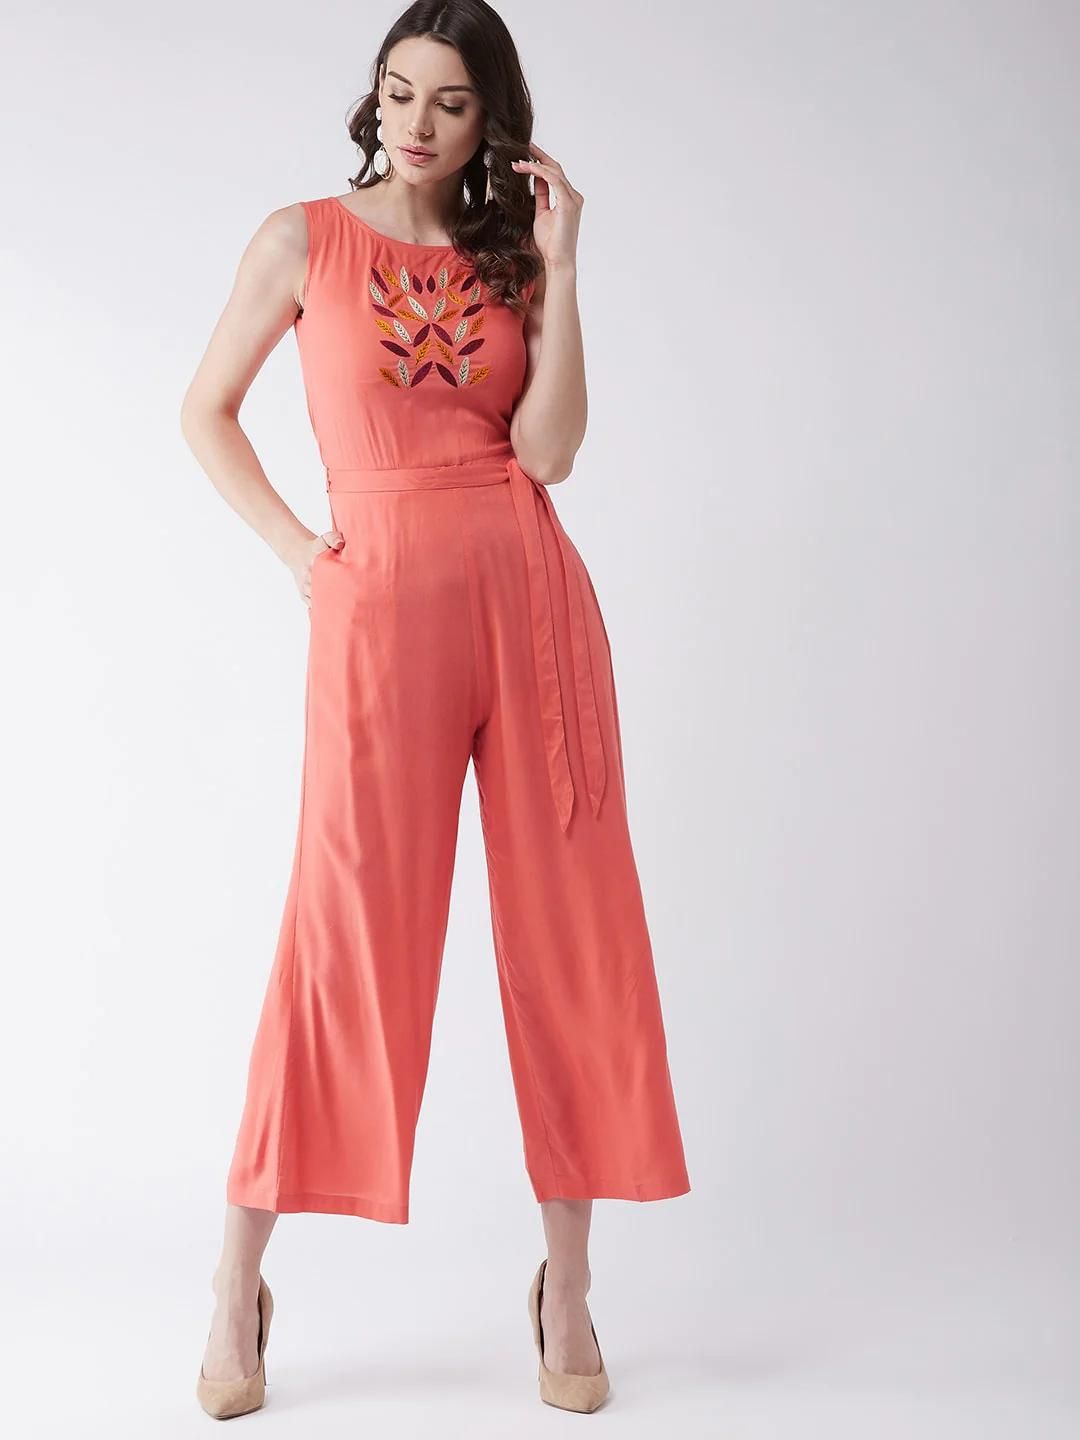 PANNKH Coral Embroidered Sleeveless Jumpsuit